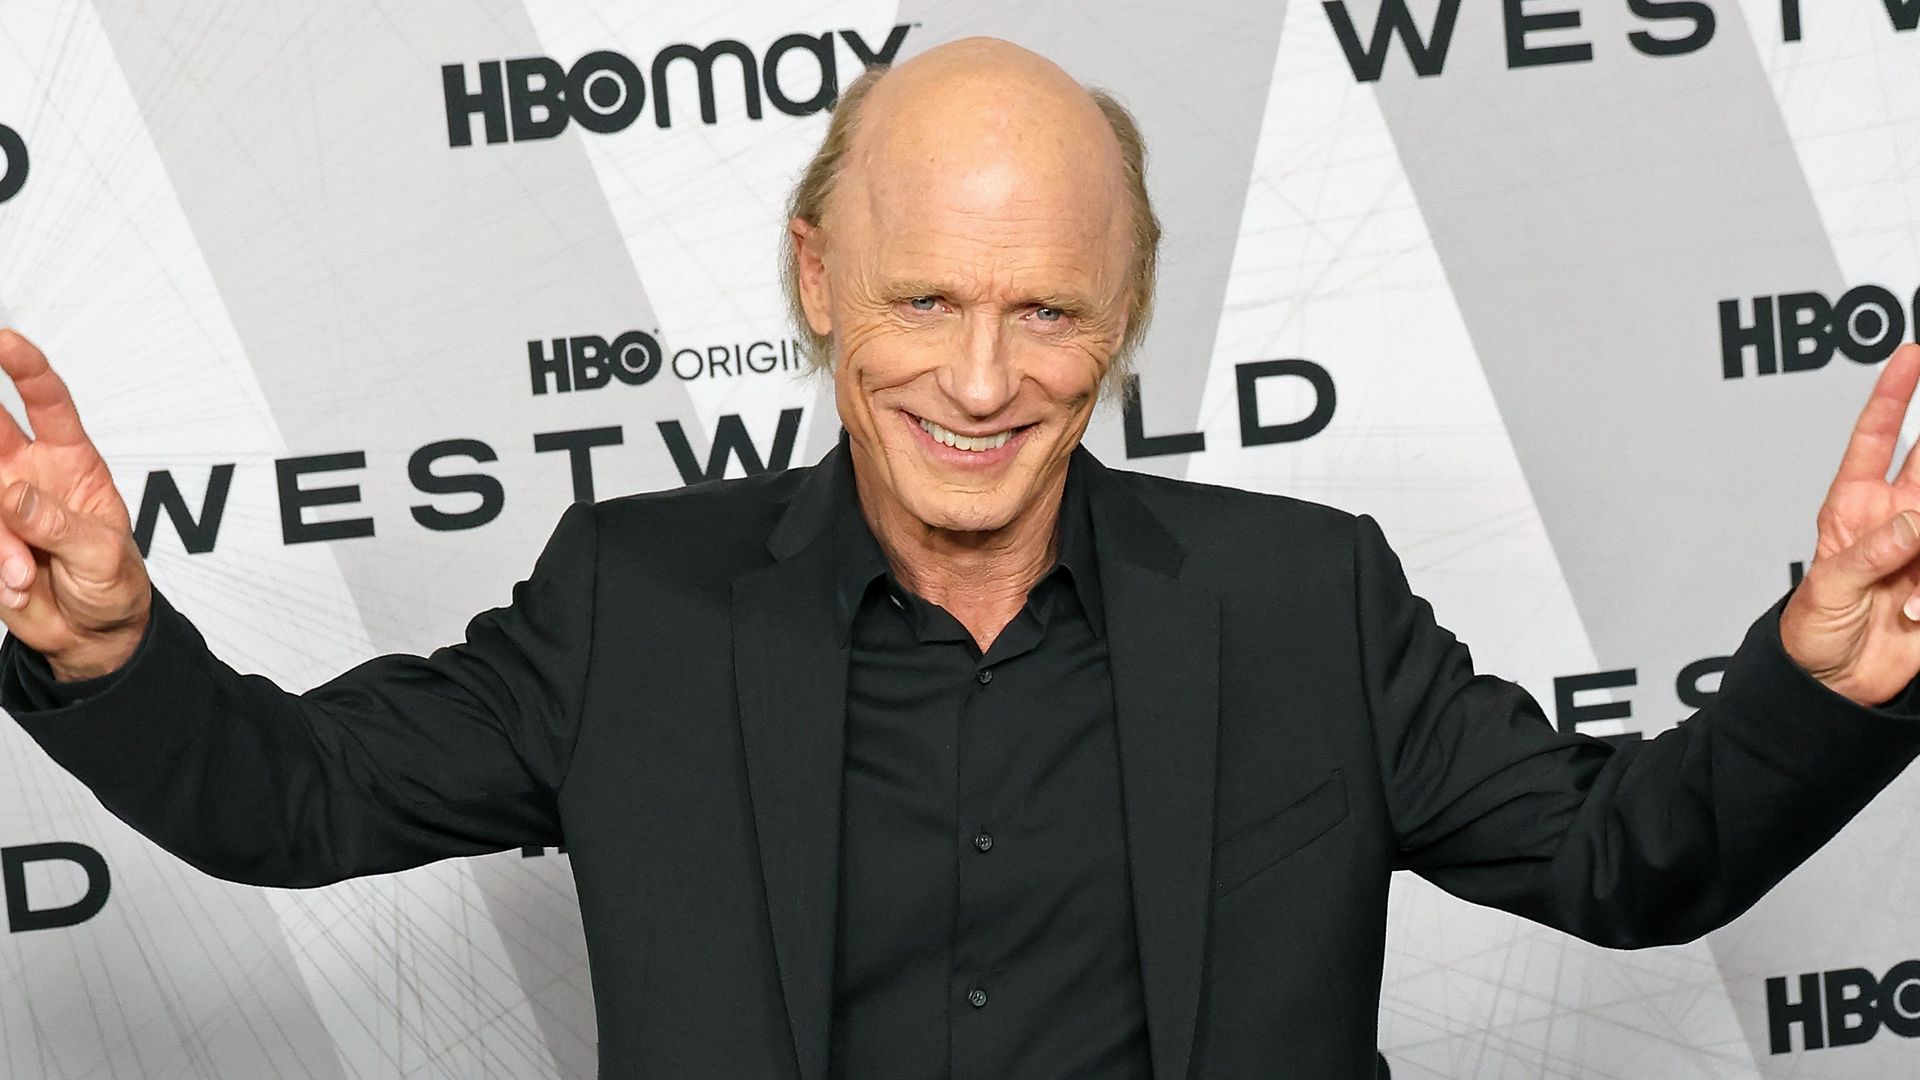 Ed Harris smiling and doing peace signs on a red carpet